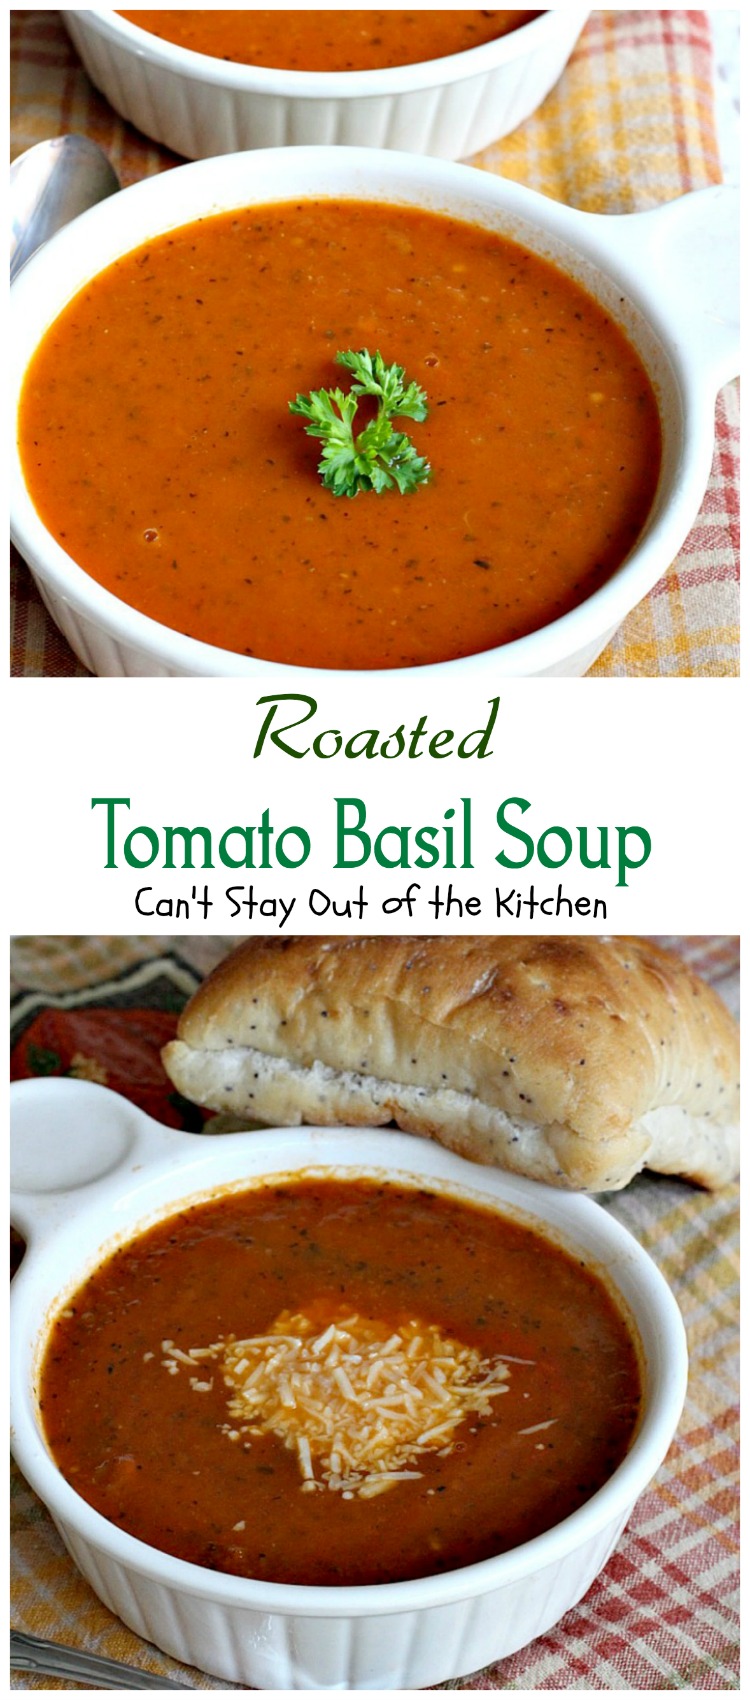 Roasted Tomato Garlic Soup - Can't Stay Out of the Kitchen